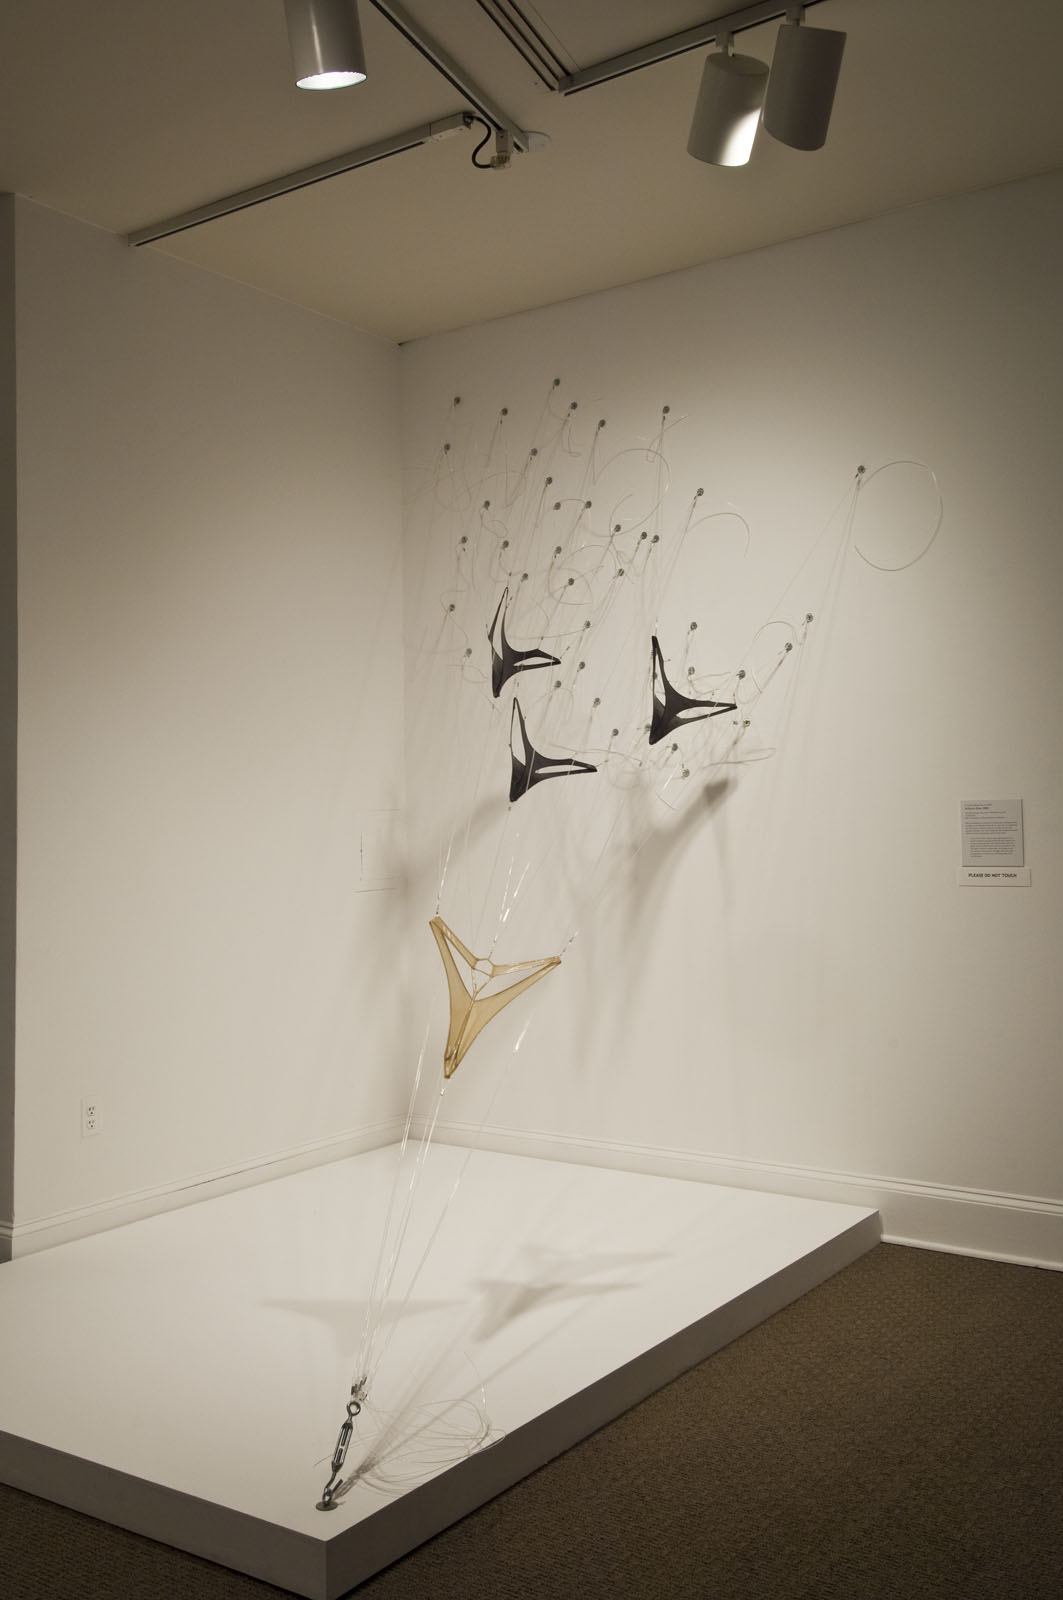 A sculpture made made from spandex and objects resembling military planes flying down towards the ground.